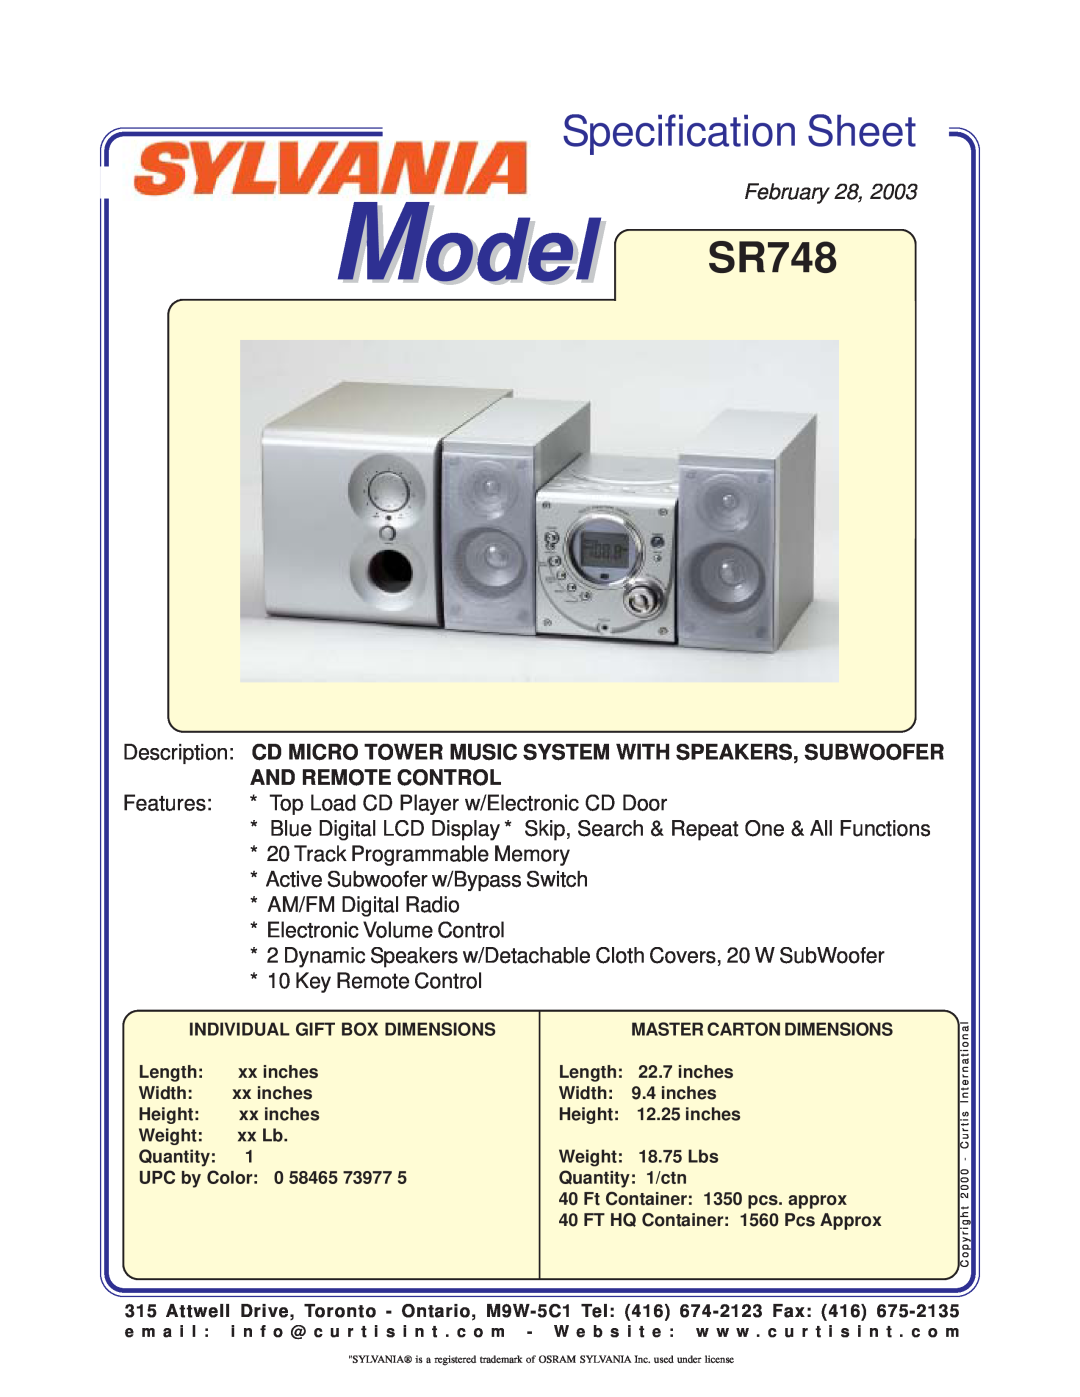 Curtis specifications Model SR748, Specification Sheet, February, Place Image Here, And Remote Control 